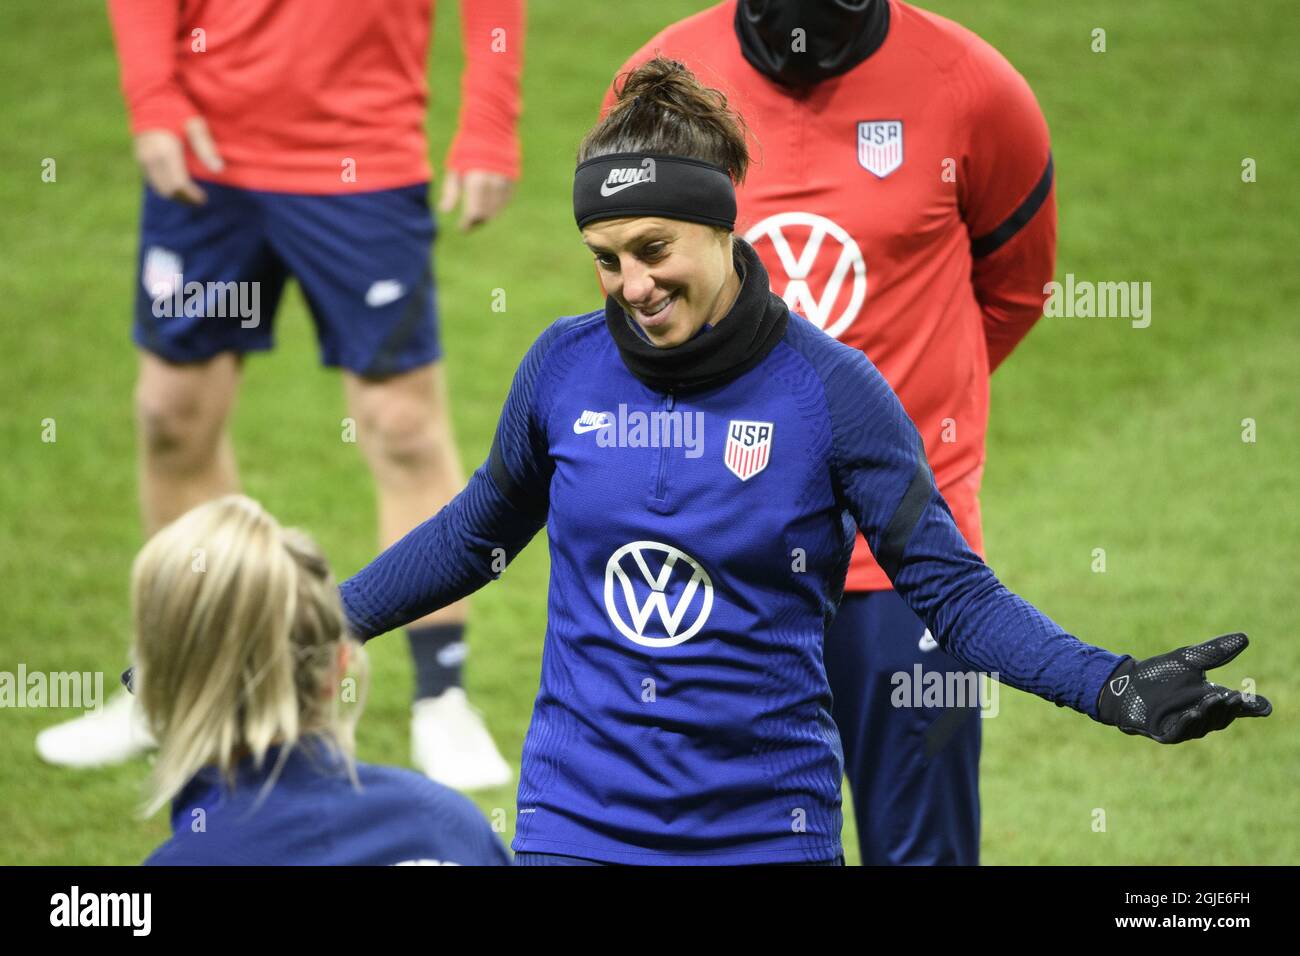 Carli Lloyd (C) in action during a USA women's national team training session at Friends arena in Stockholm, Sweden, on Friday April 9, 2021. USA will meet Sweden in a friendly international game on Saturday. Photo: Henrik Montgomery / TT / kod 10060 *** SWEDEN OUT ***  Stock Photo